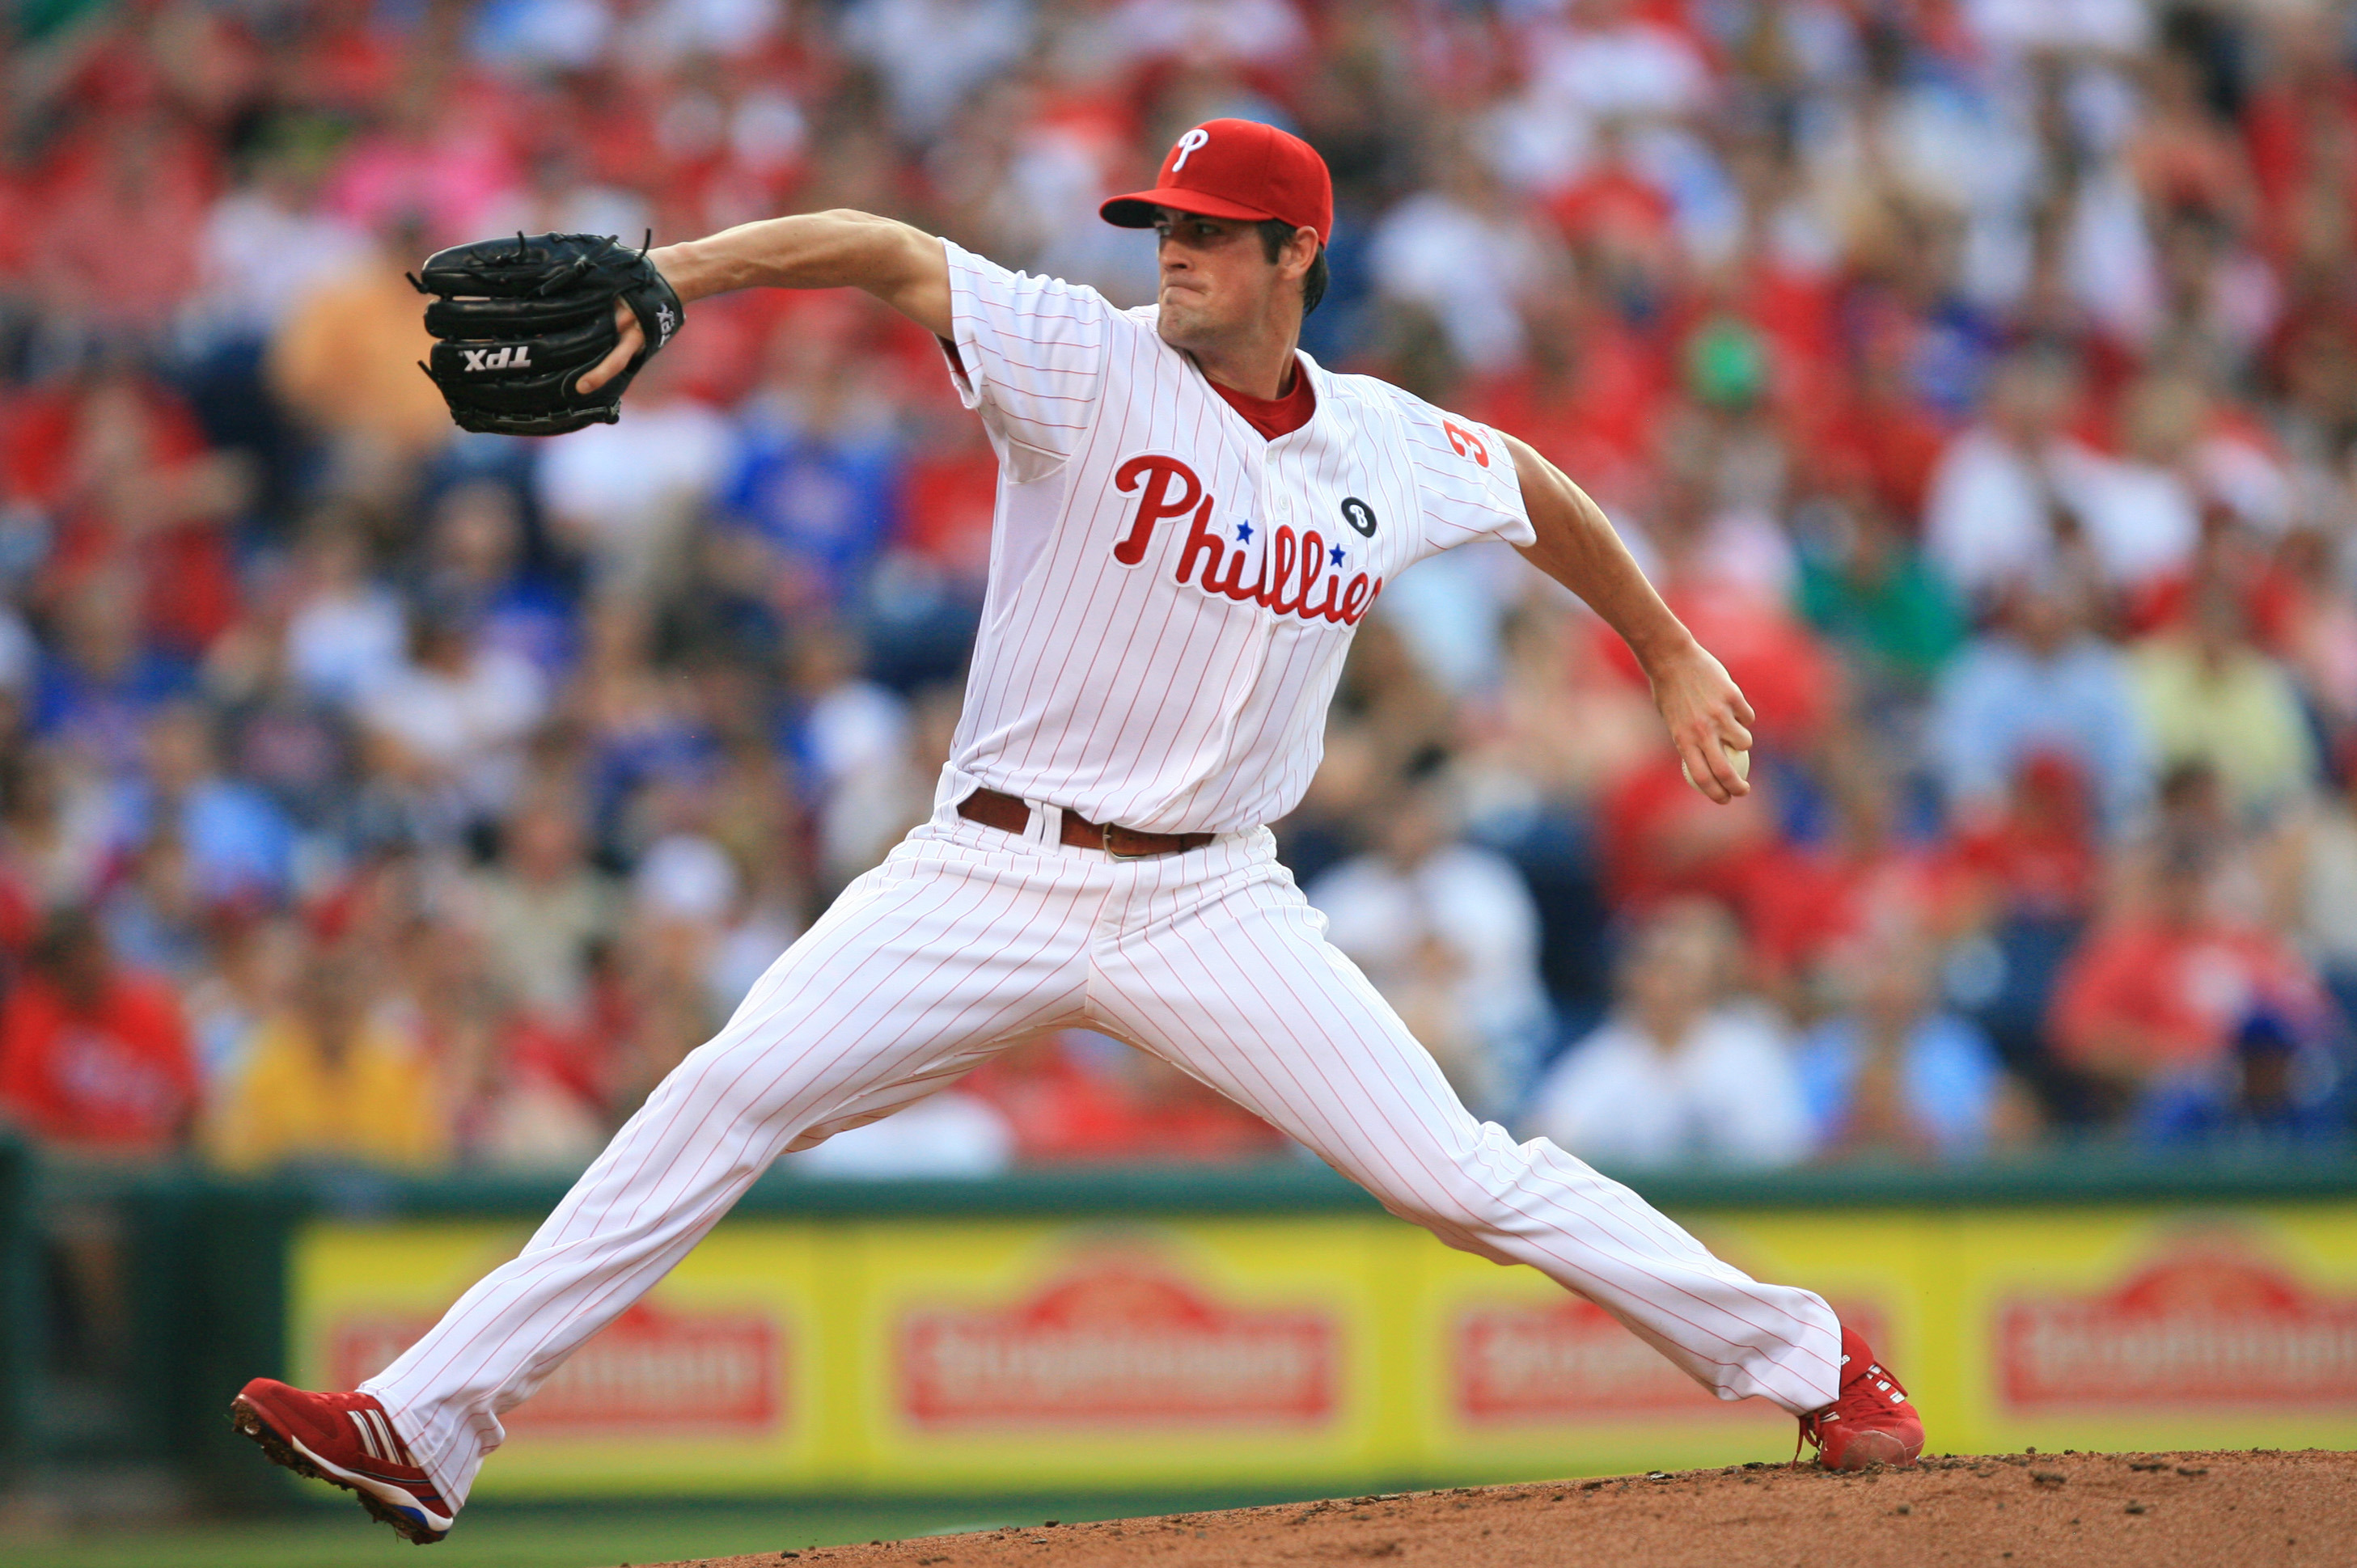 Phillies' Hamels used to look up to Pettitte as a kid